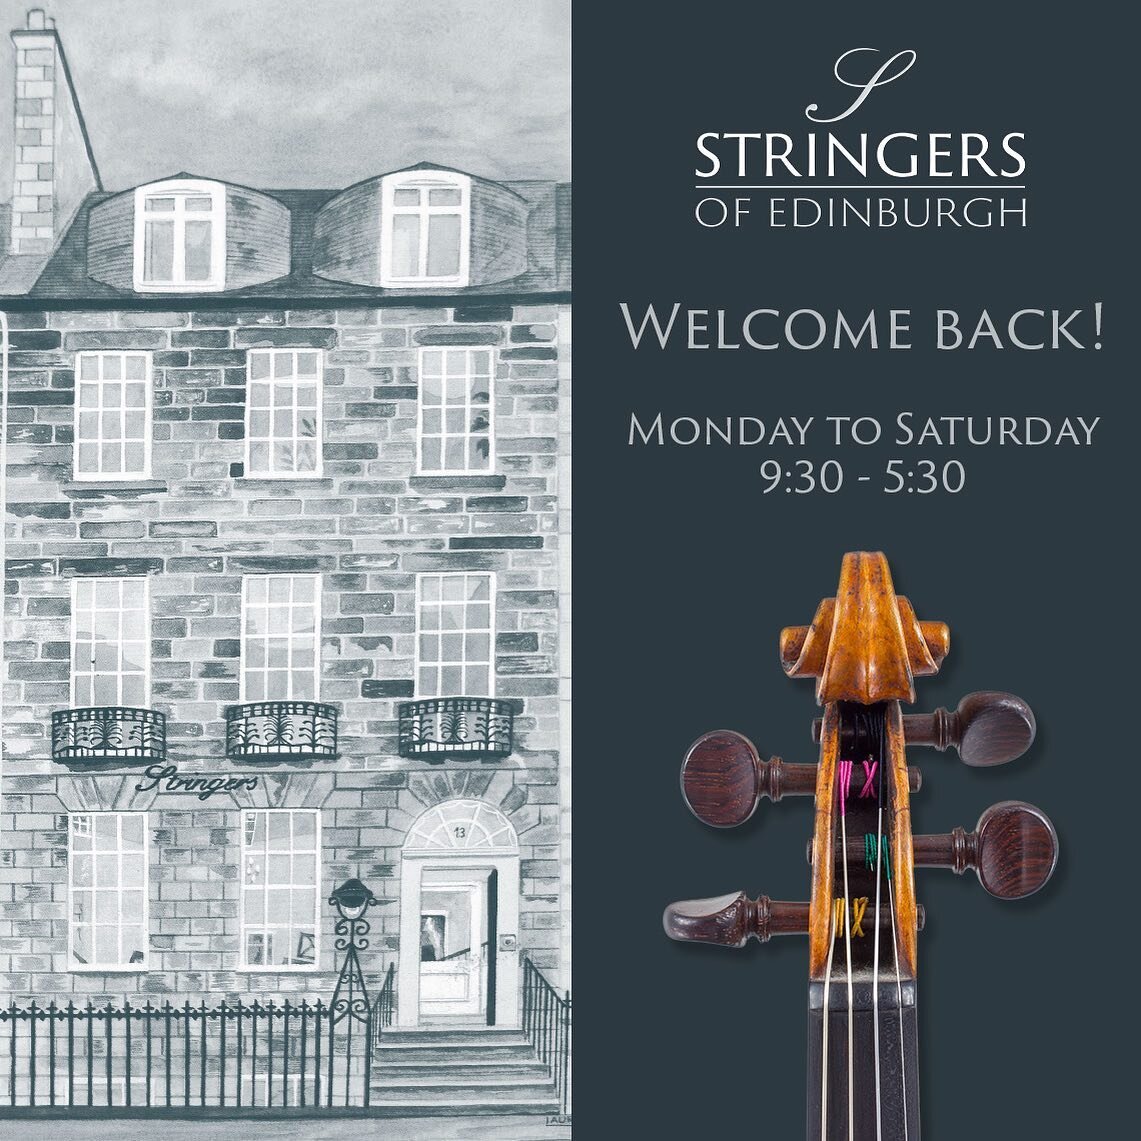 We look forward to welcoming you back to the shop! You can make an appointment at stringersmusic.com #violinstagram #violinistsofinstagram #celloplayer #wereback #seeyousoon